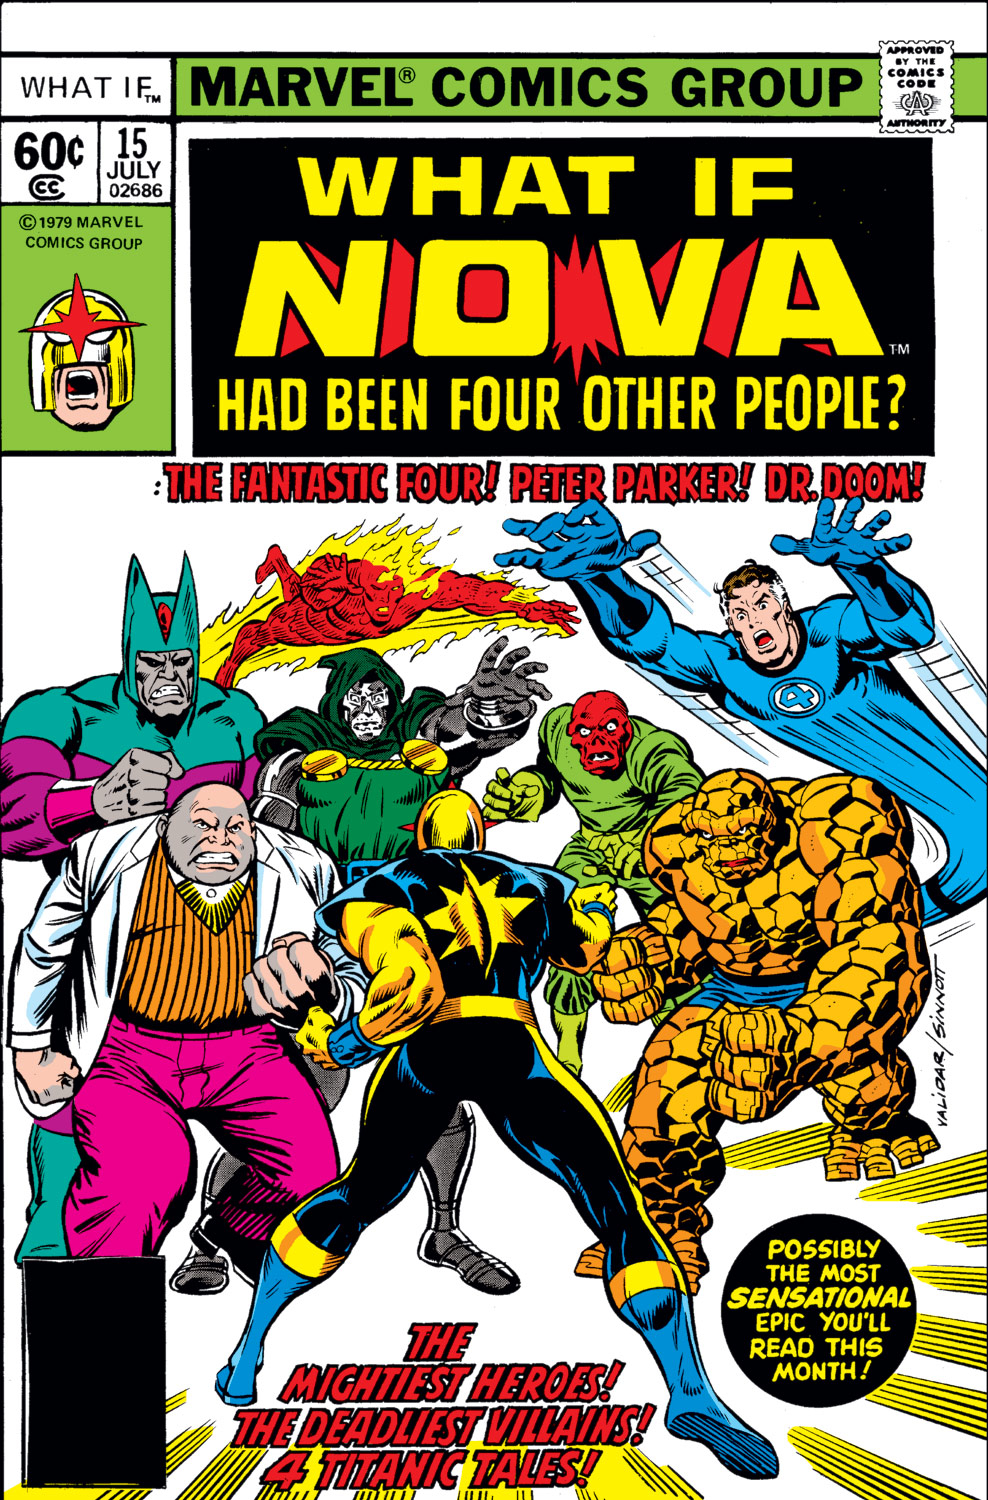 <{ $series->title }} issue 15 - Nova had been four other people - Page 1